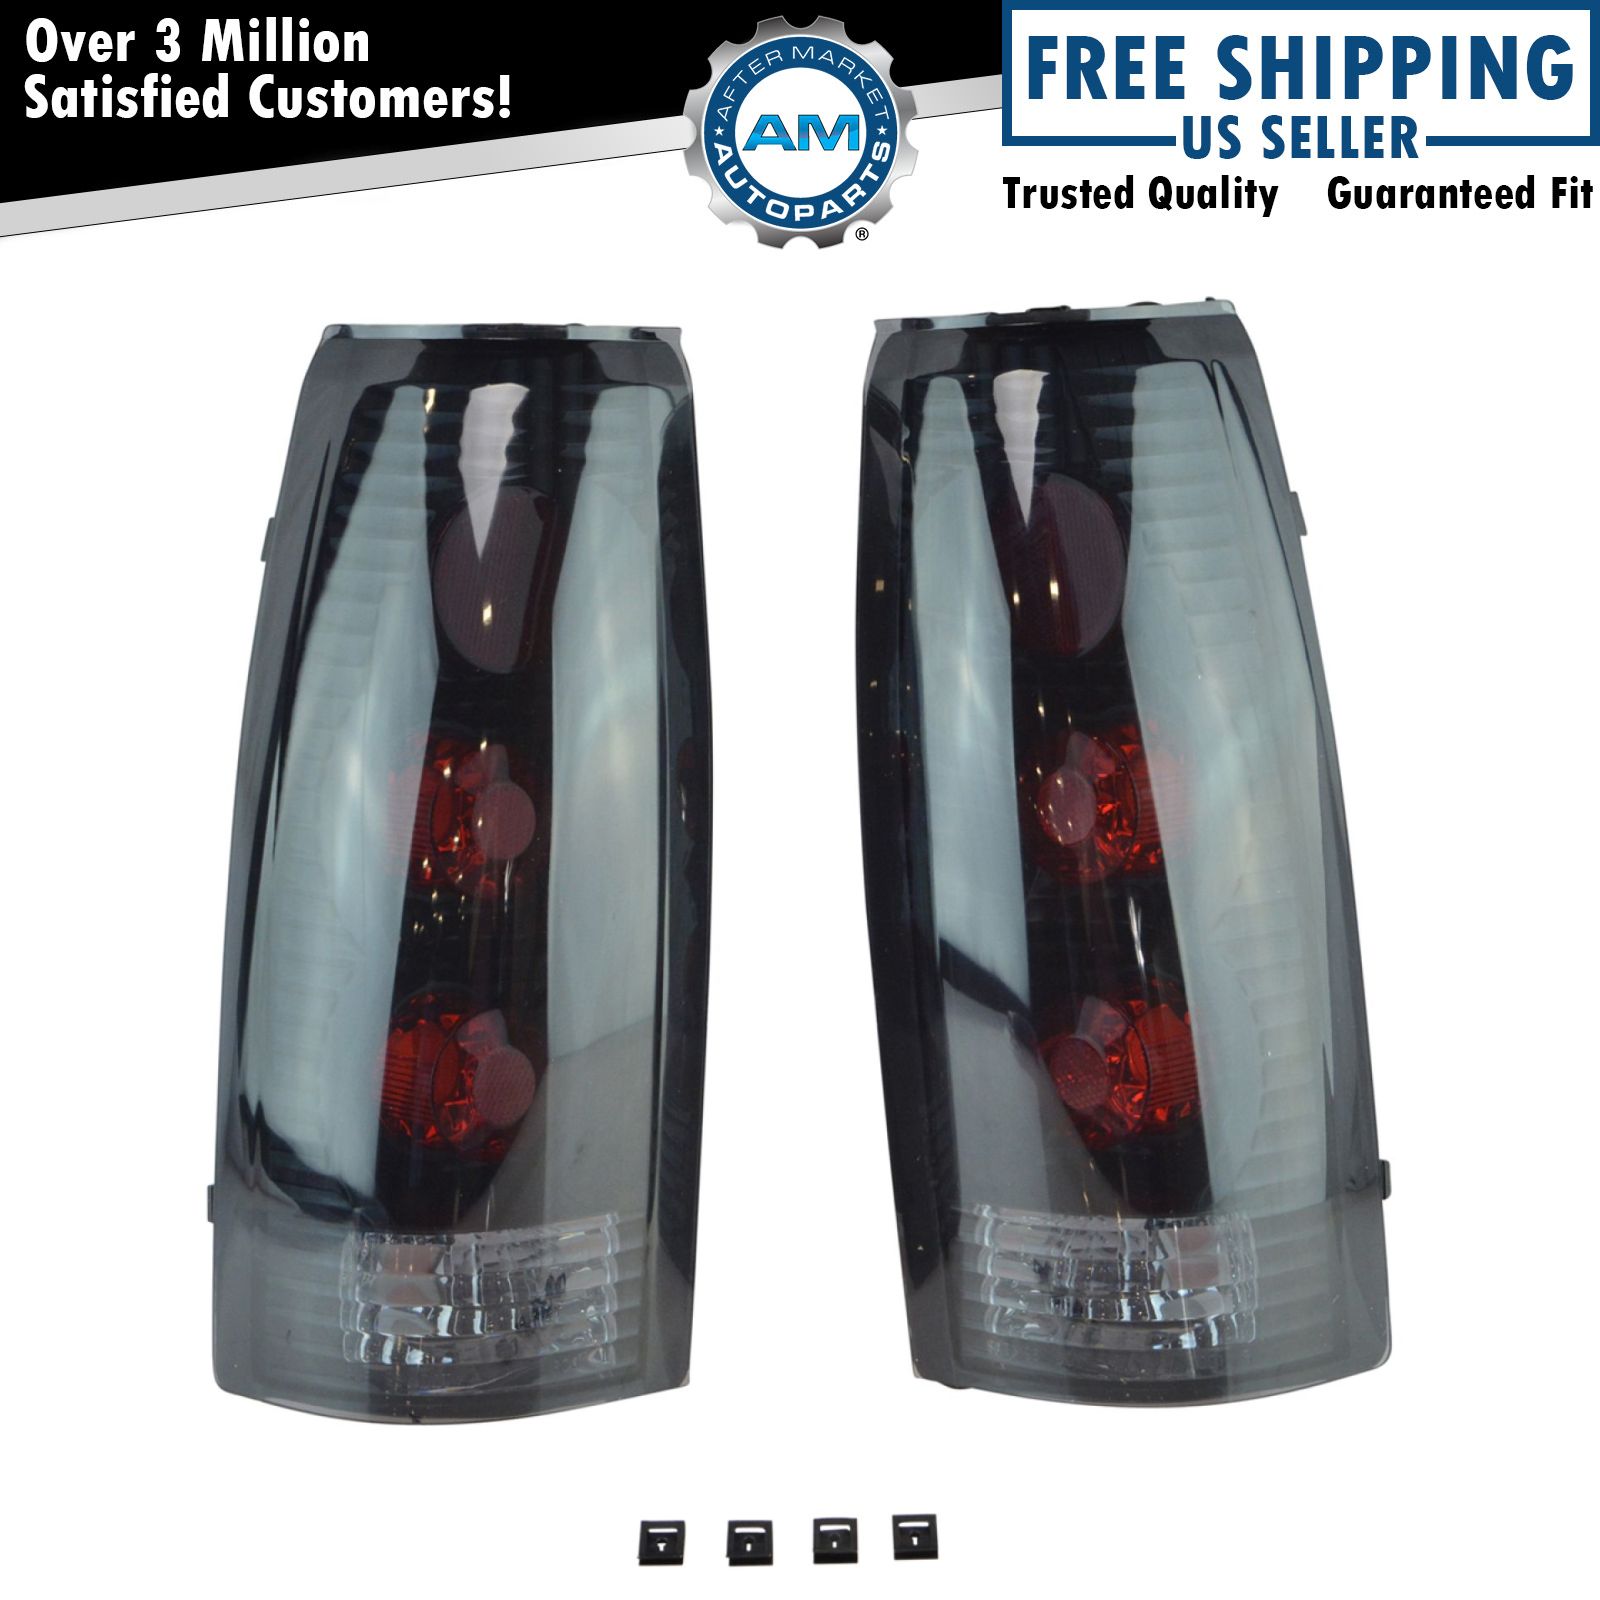 Tail Lights Performance Smoked Lens Altezza Style Lamps Pair for C/K Truck Yukon